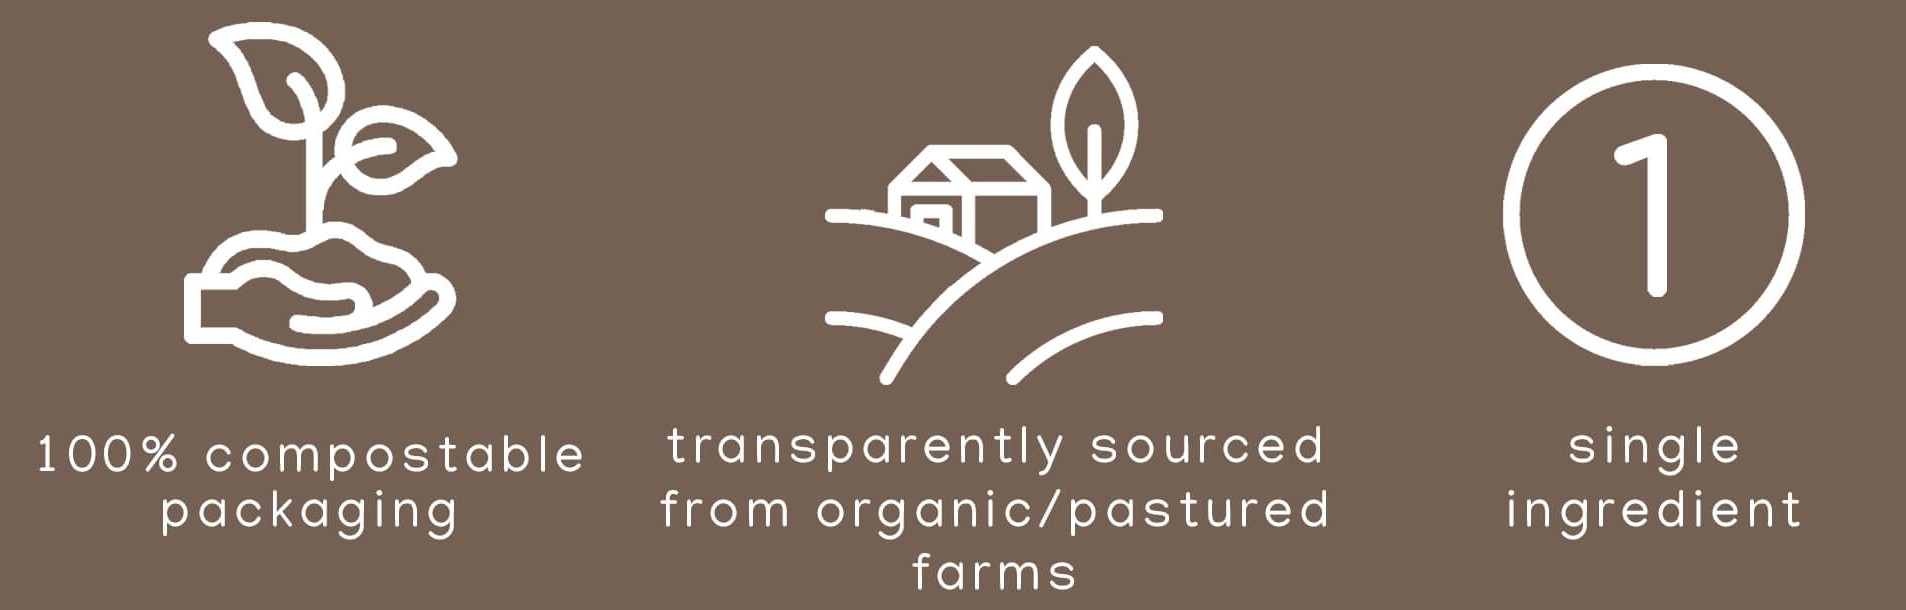 5019066108776-transparently-sourced-compostable-packaging.jpg